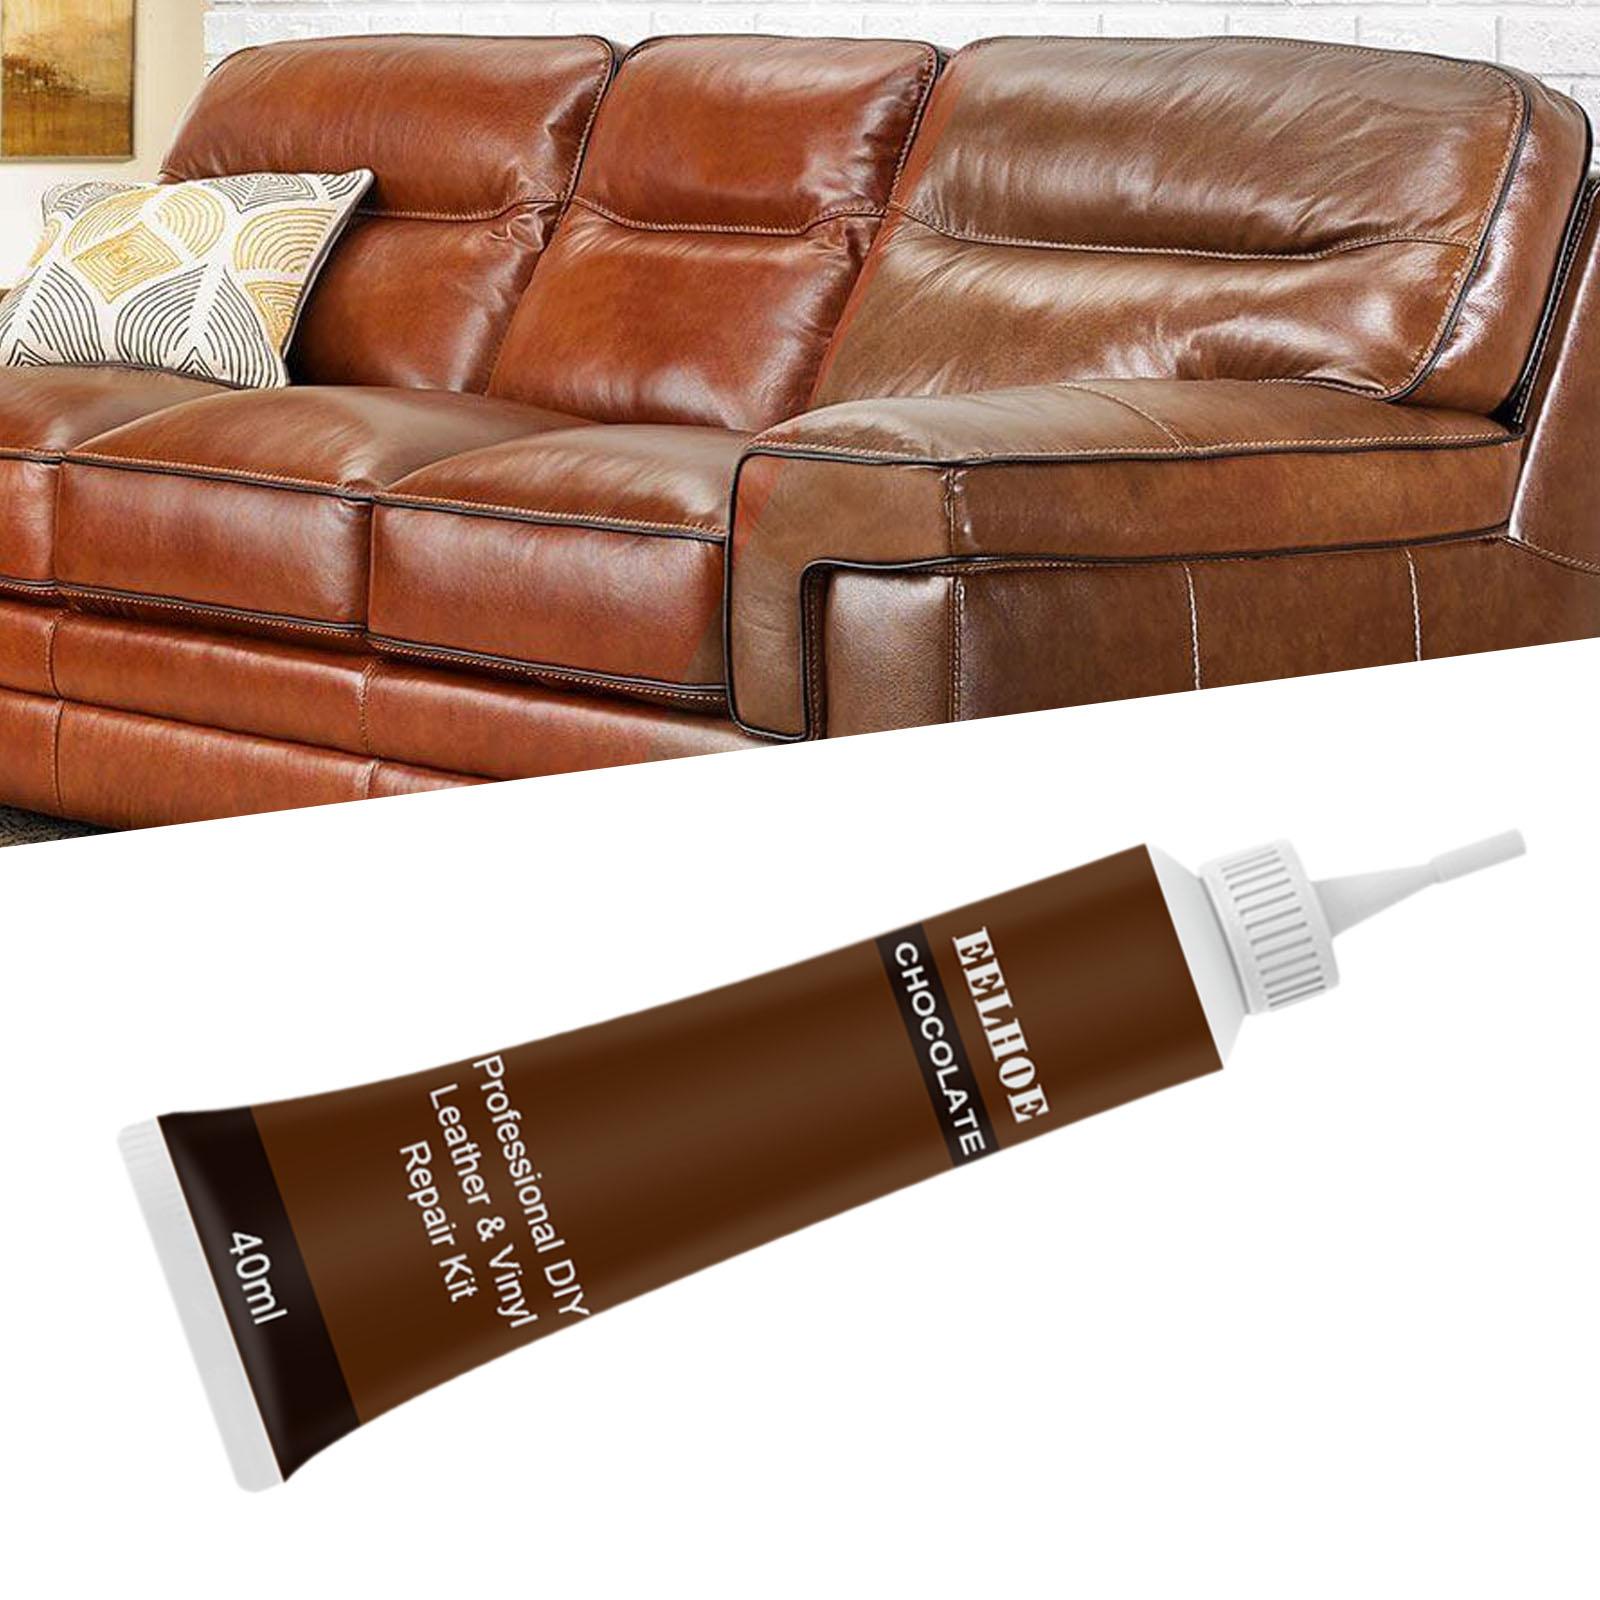 Leather Recoloring Cream Leather Color Restorer for Furniture Bag Purse 40ml Chocolate Color